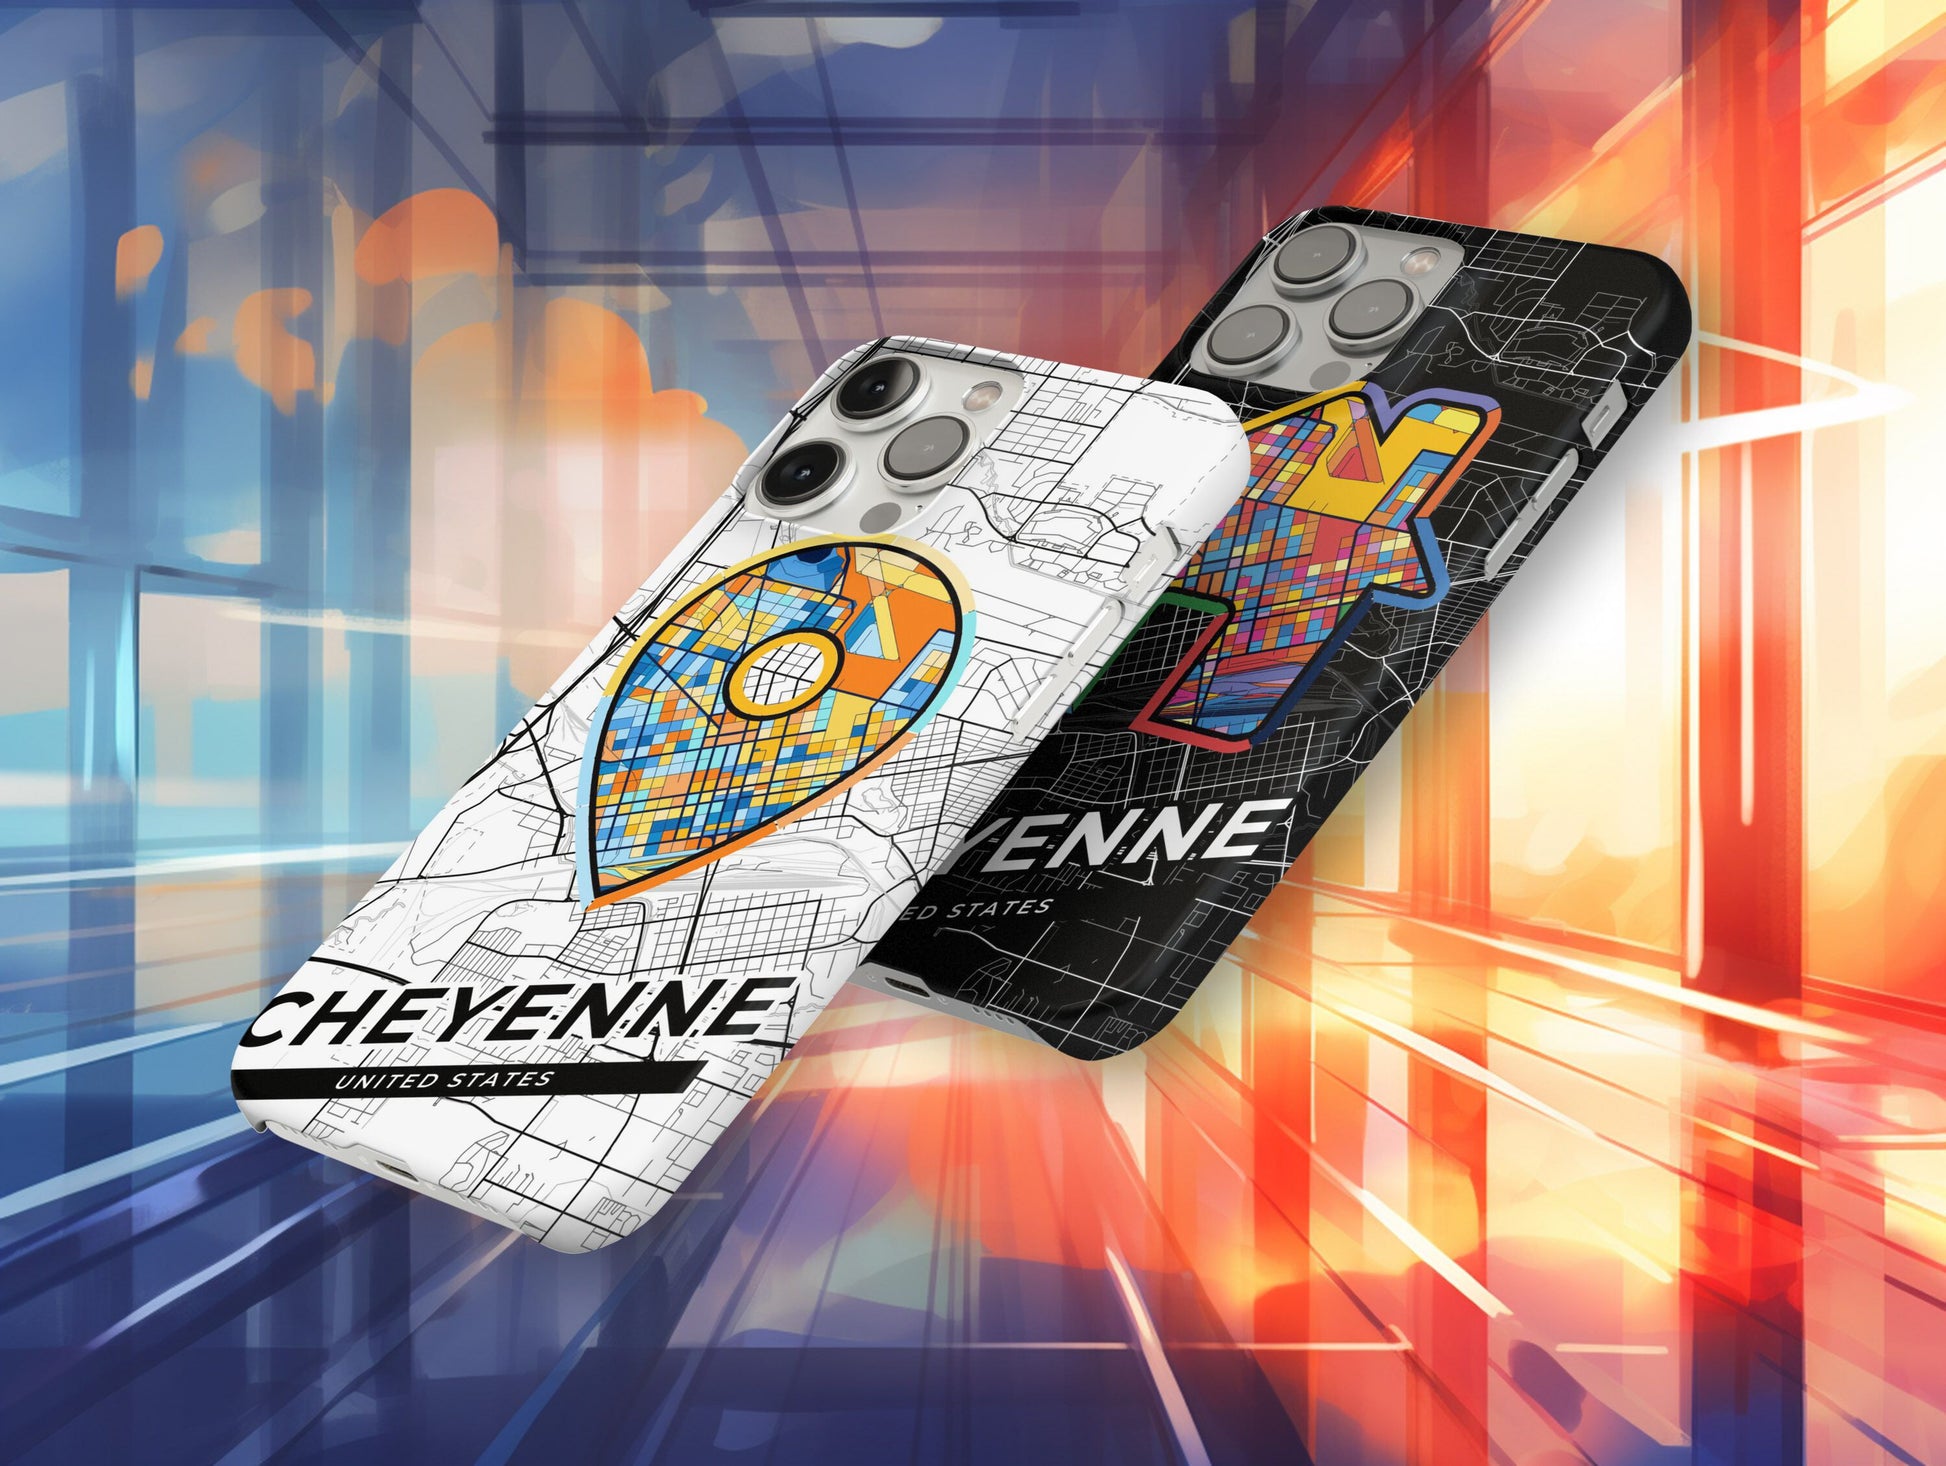 Cheyenne Wyoming slim phone case with colorful icon. Birthday, wedding or housewarming gift. Couple match cases.